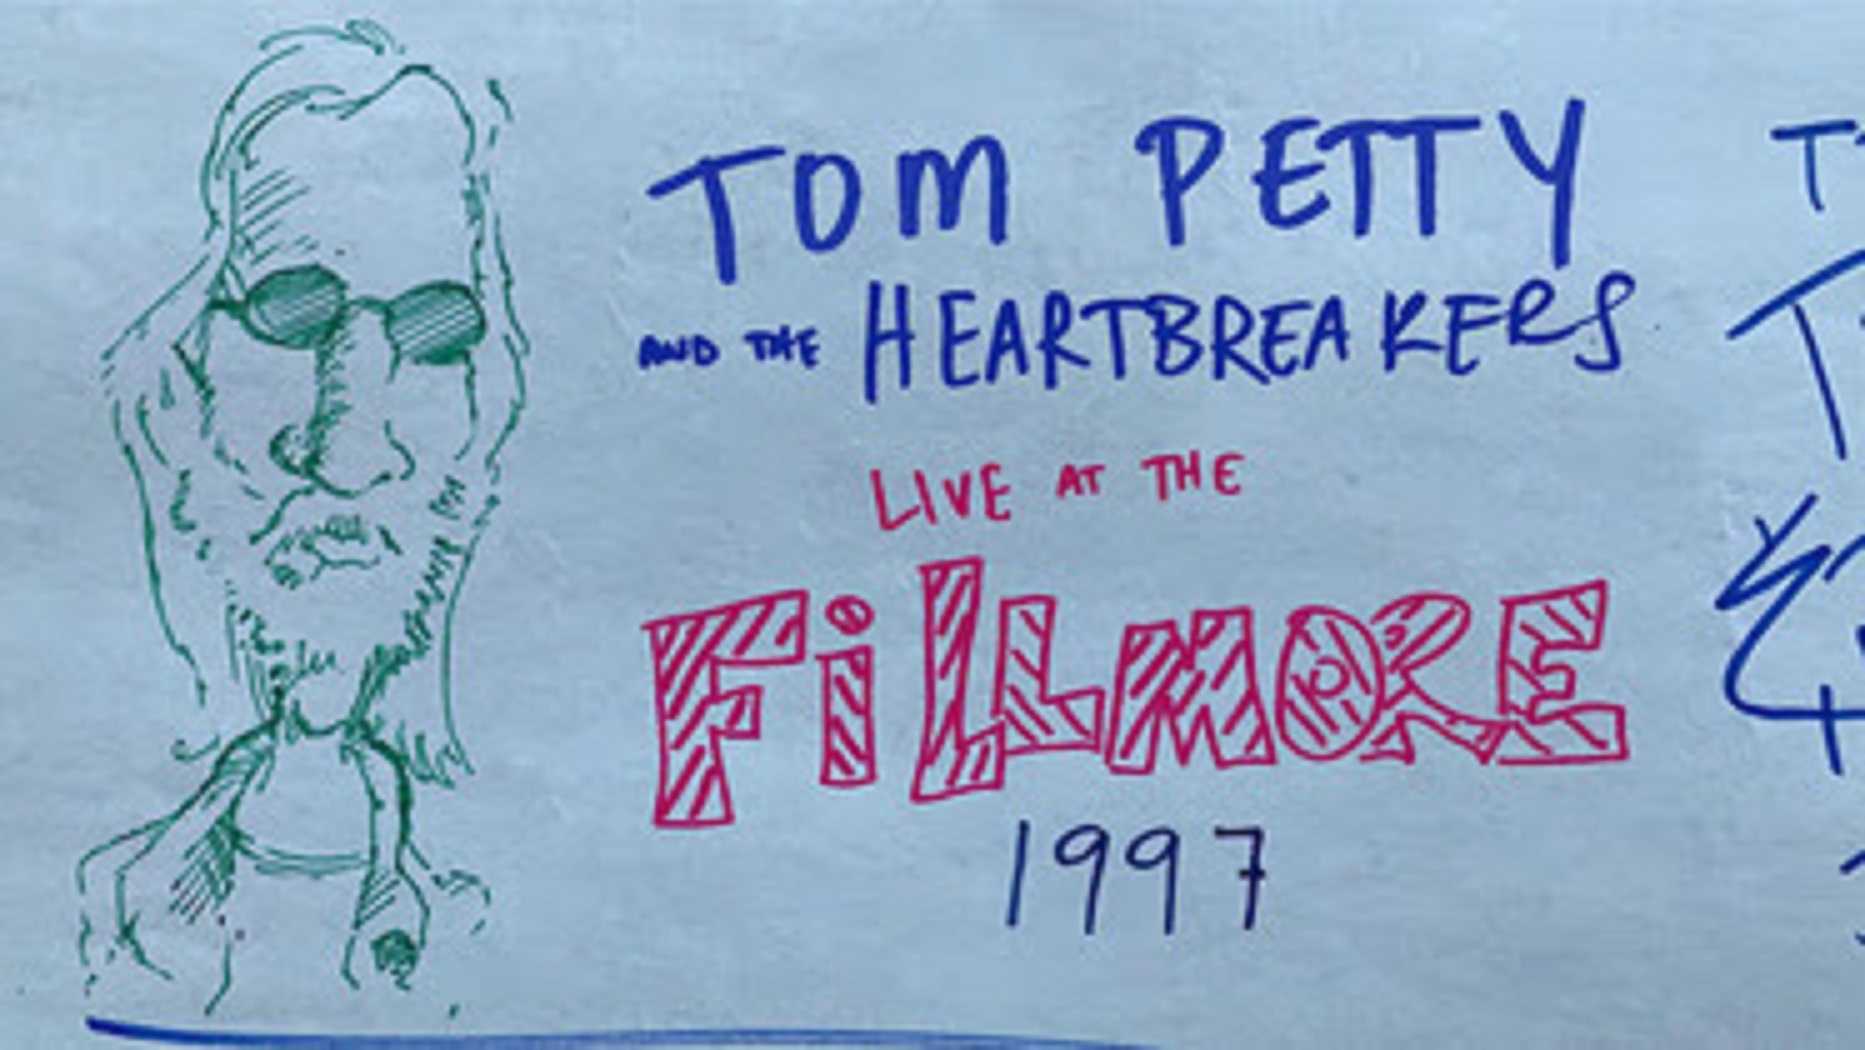 Tom Petty and the Heartbreakers— The Fillmore House Band—1997 (Short Film Part 2) out now